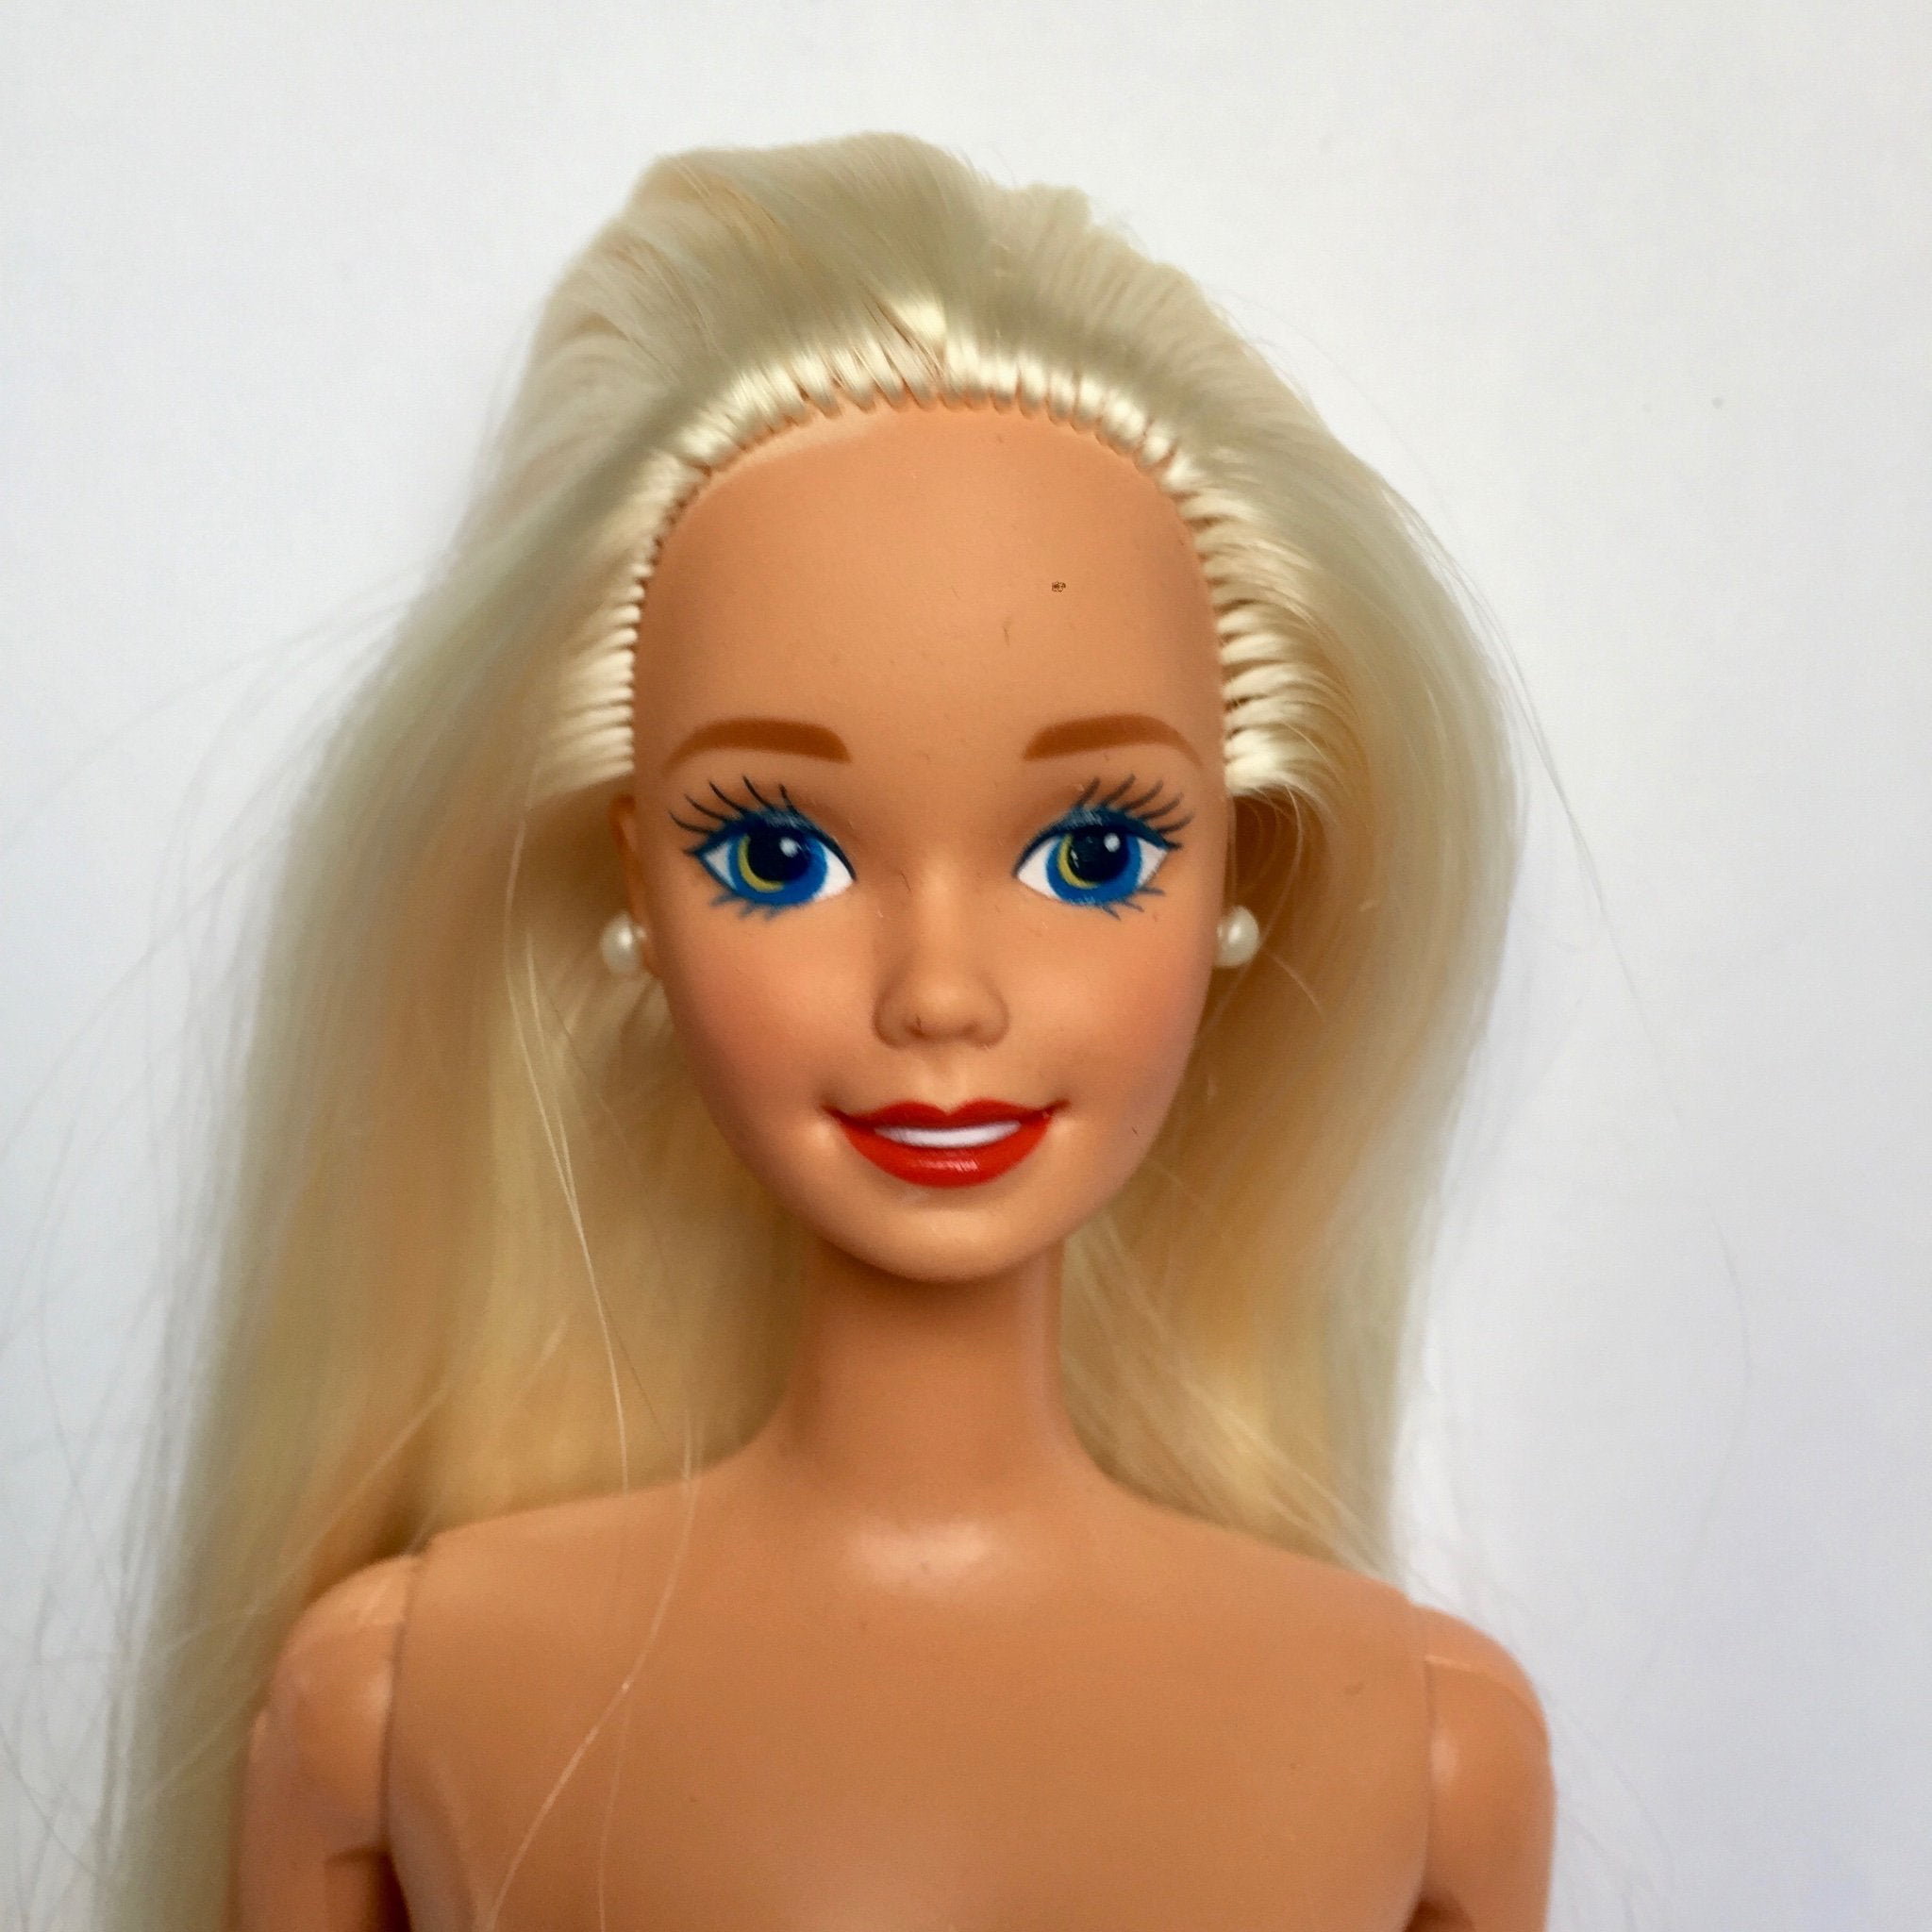 NEW Barbie Camping Fishing Picnic Doll Blonde Hair Blue Eyes Pink Lips ~ NUDE 